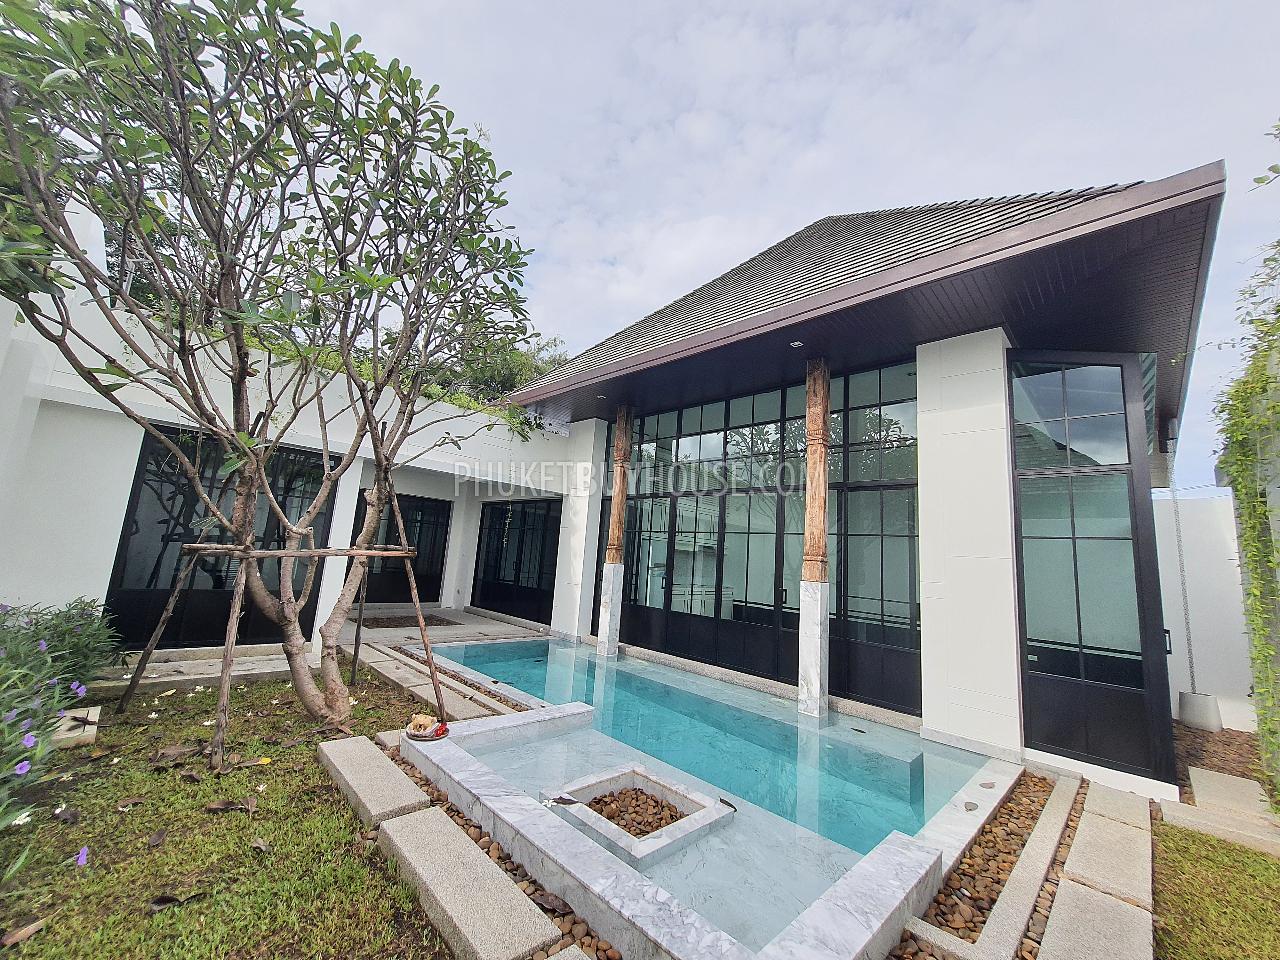 BAN6282: New Villa with 3 Bedrooms and Private Pool in a Convenient Area near Bang Tao. Photo #39